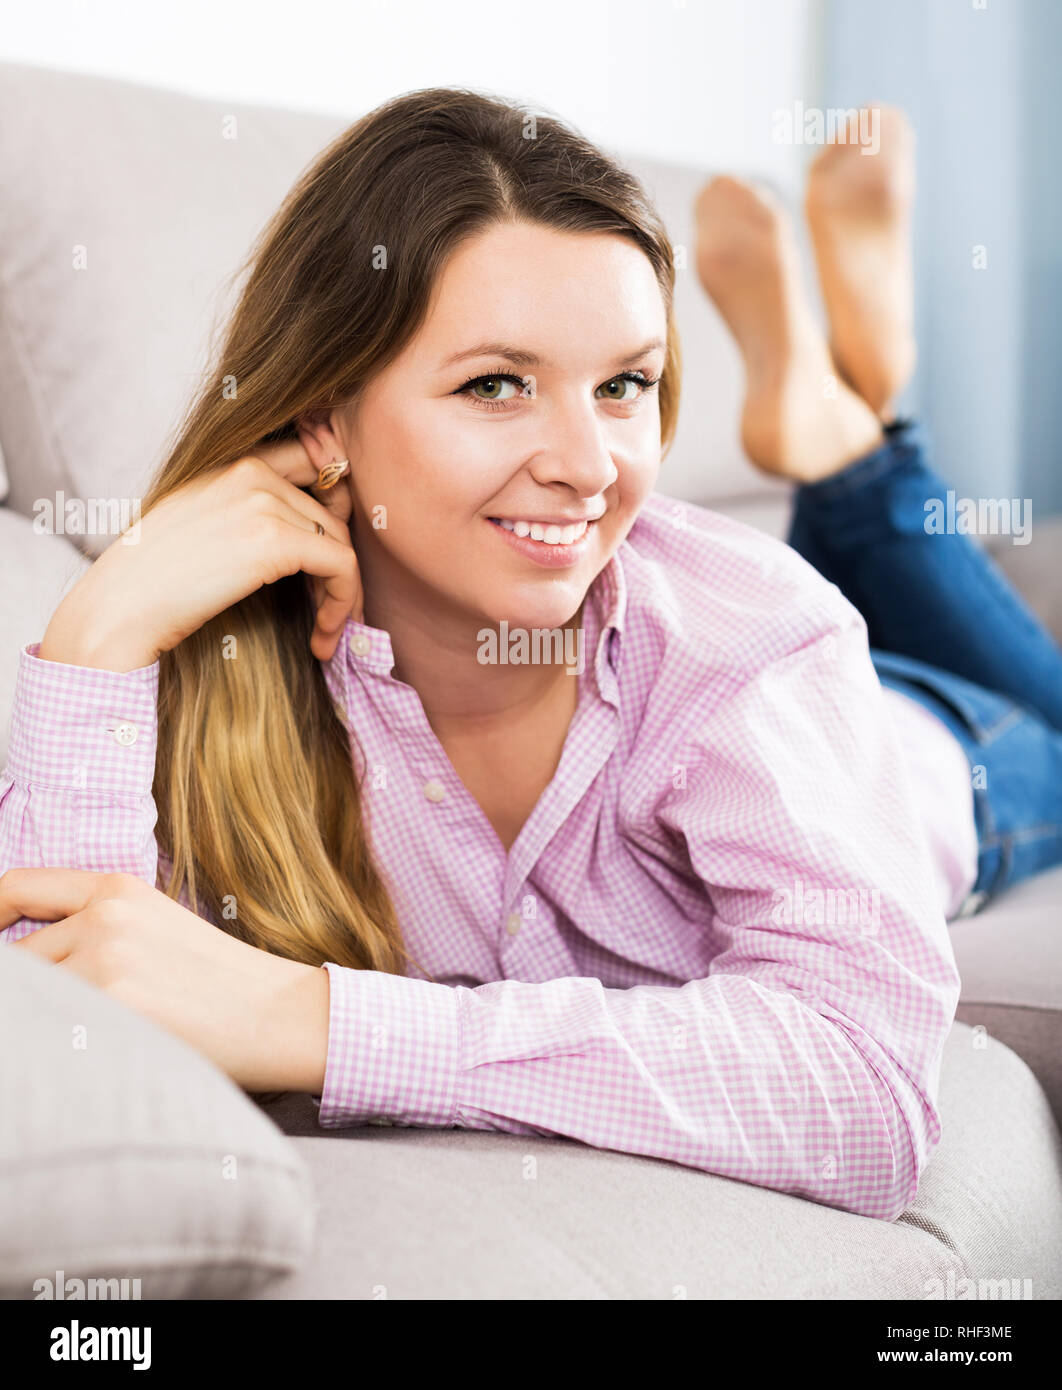 Young smiling woman posing playfully in good humor in free time in home interior Stock Photo